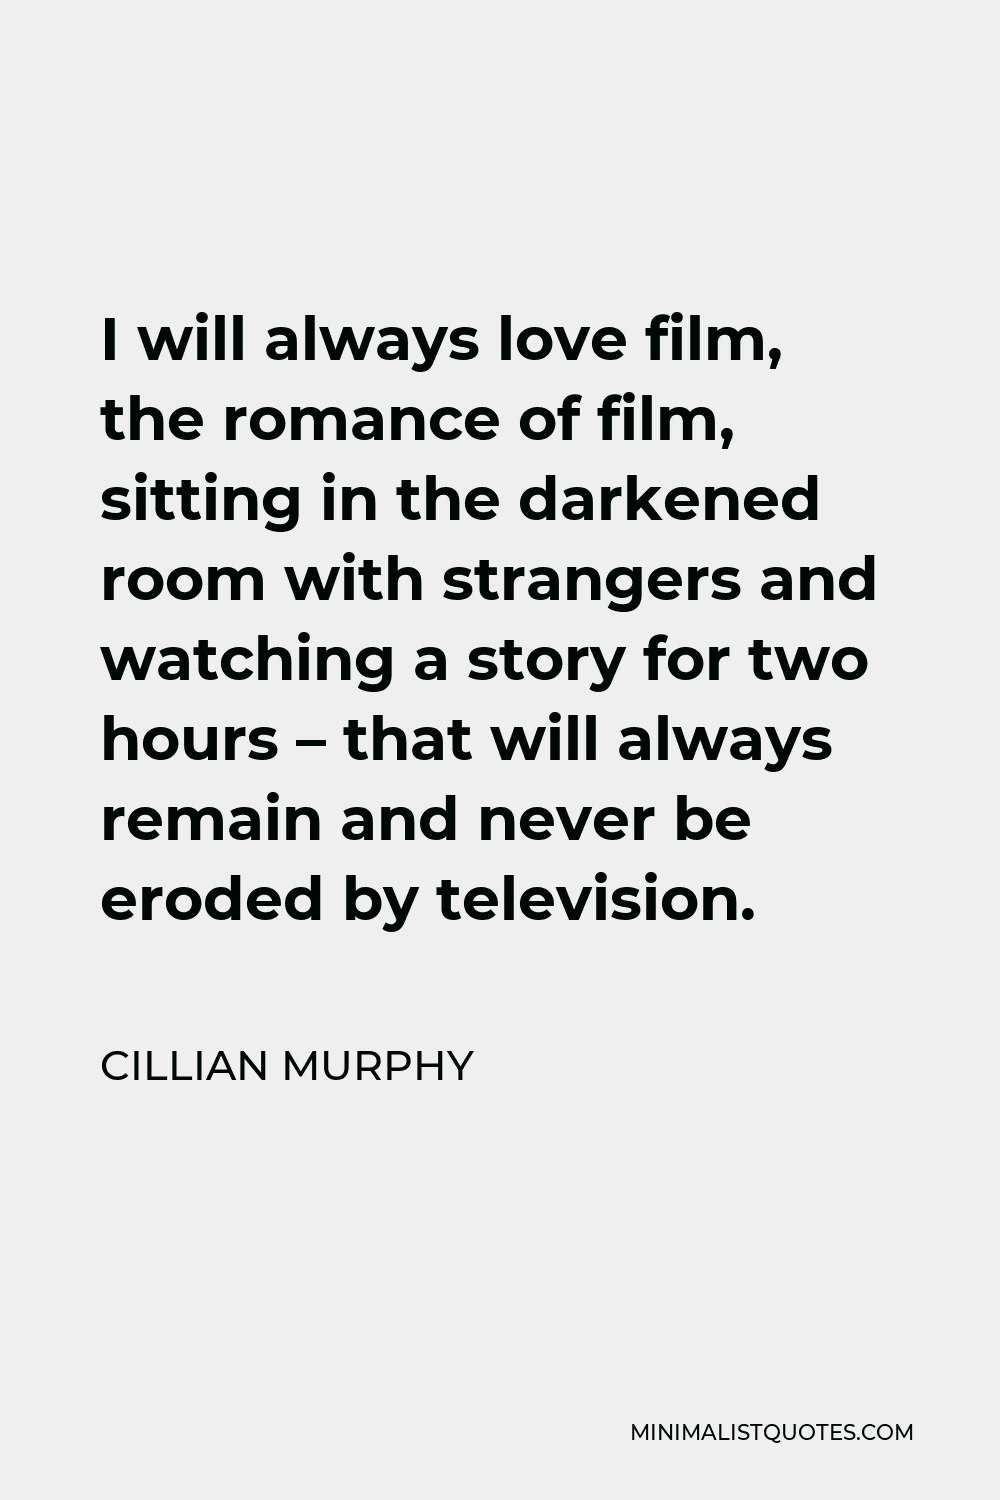 Cillian Murphy Quote - I will always love film, the romance of film, sitting in the darkened room with strangers and watching a story for two hours – that will always remain and never be eroded by television.